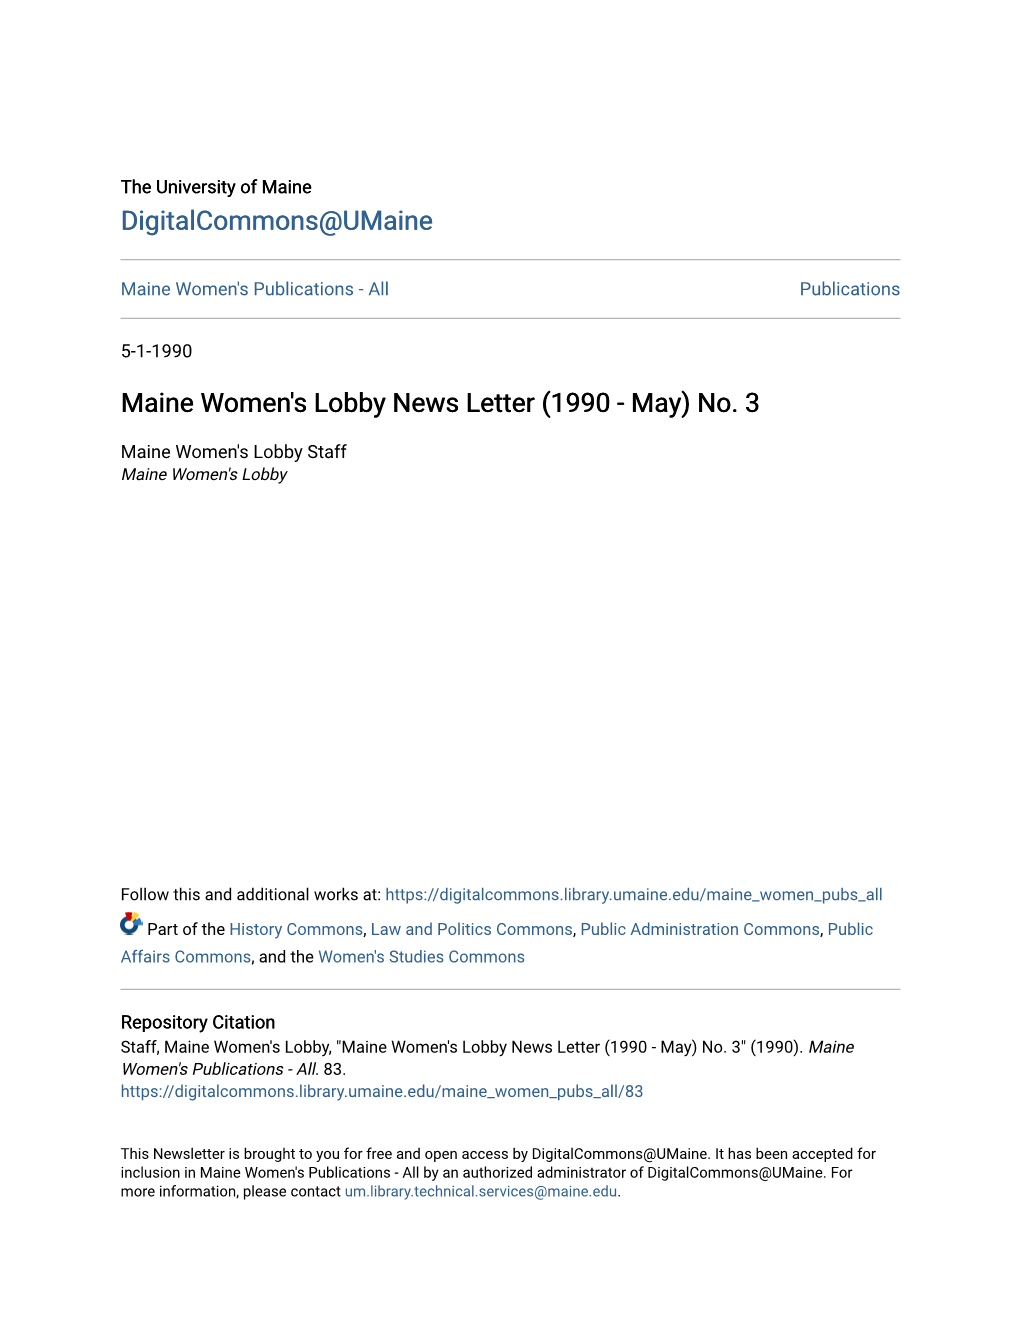 Maine Women's Lobby News Letter (1990 - May) No